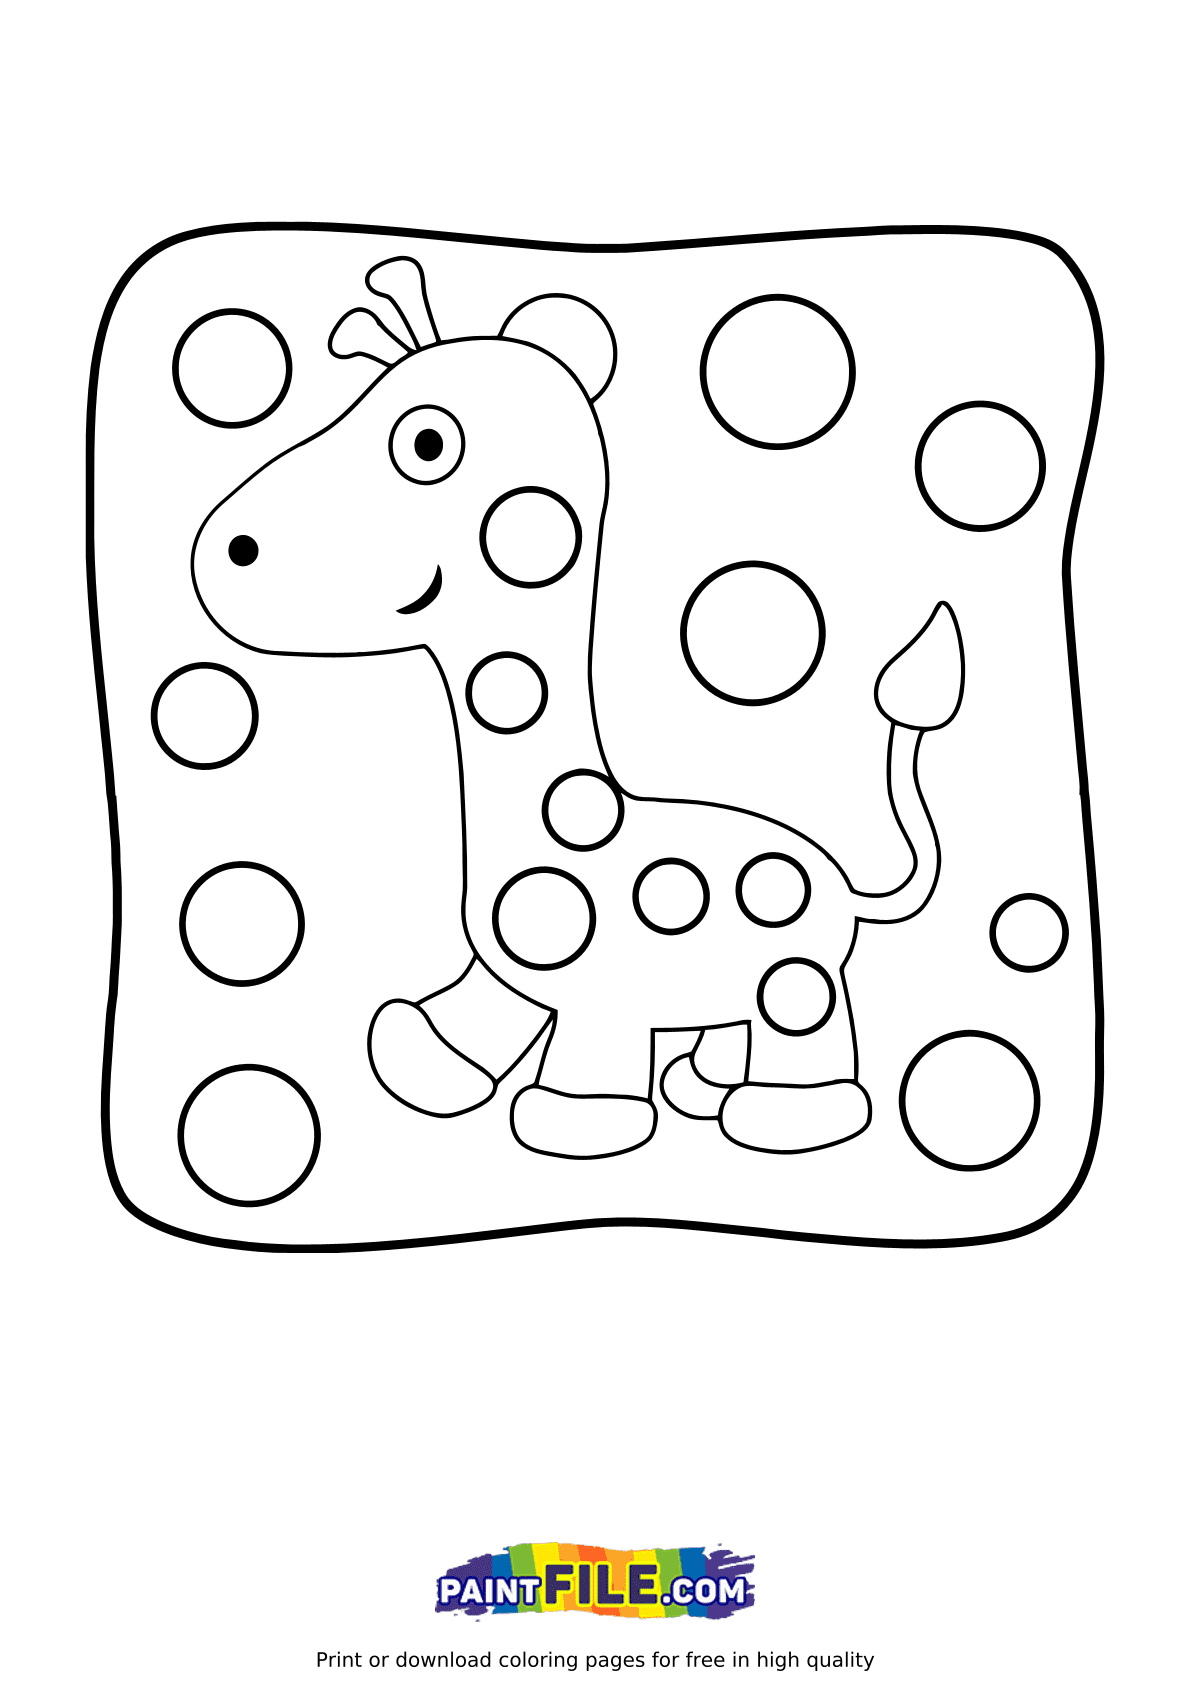 Pop it Giraffe Coloring Pages